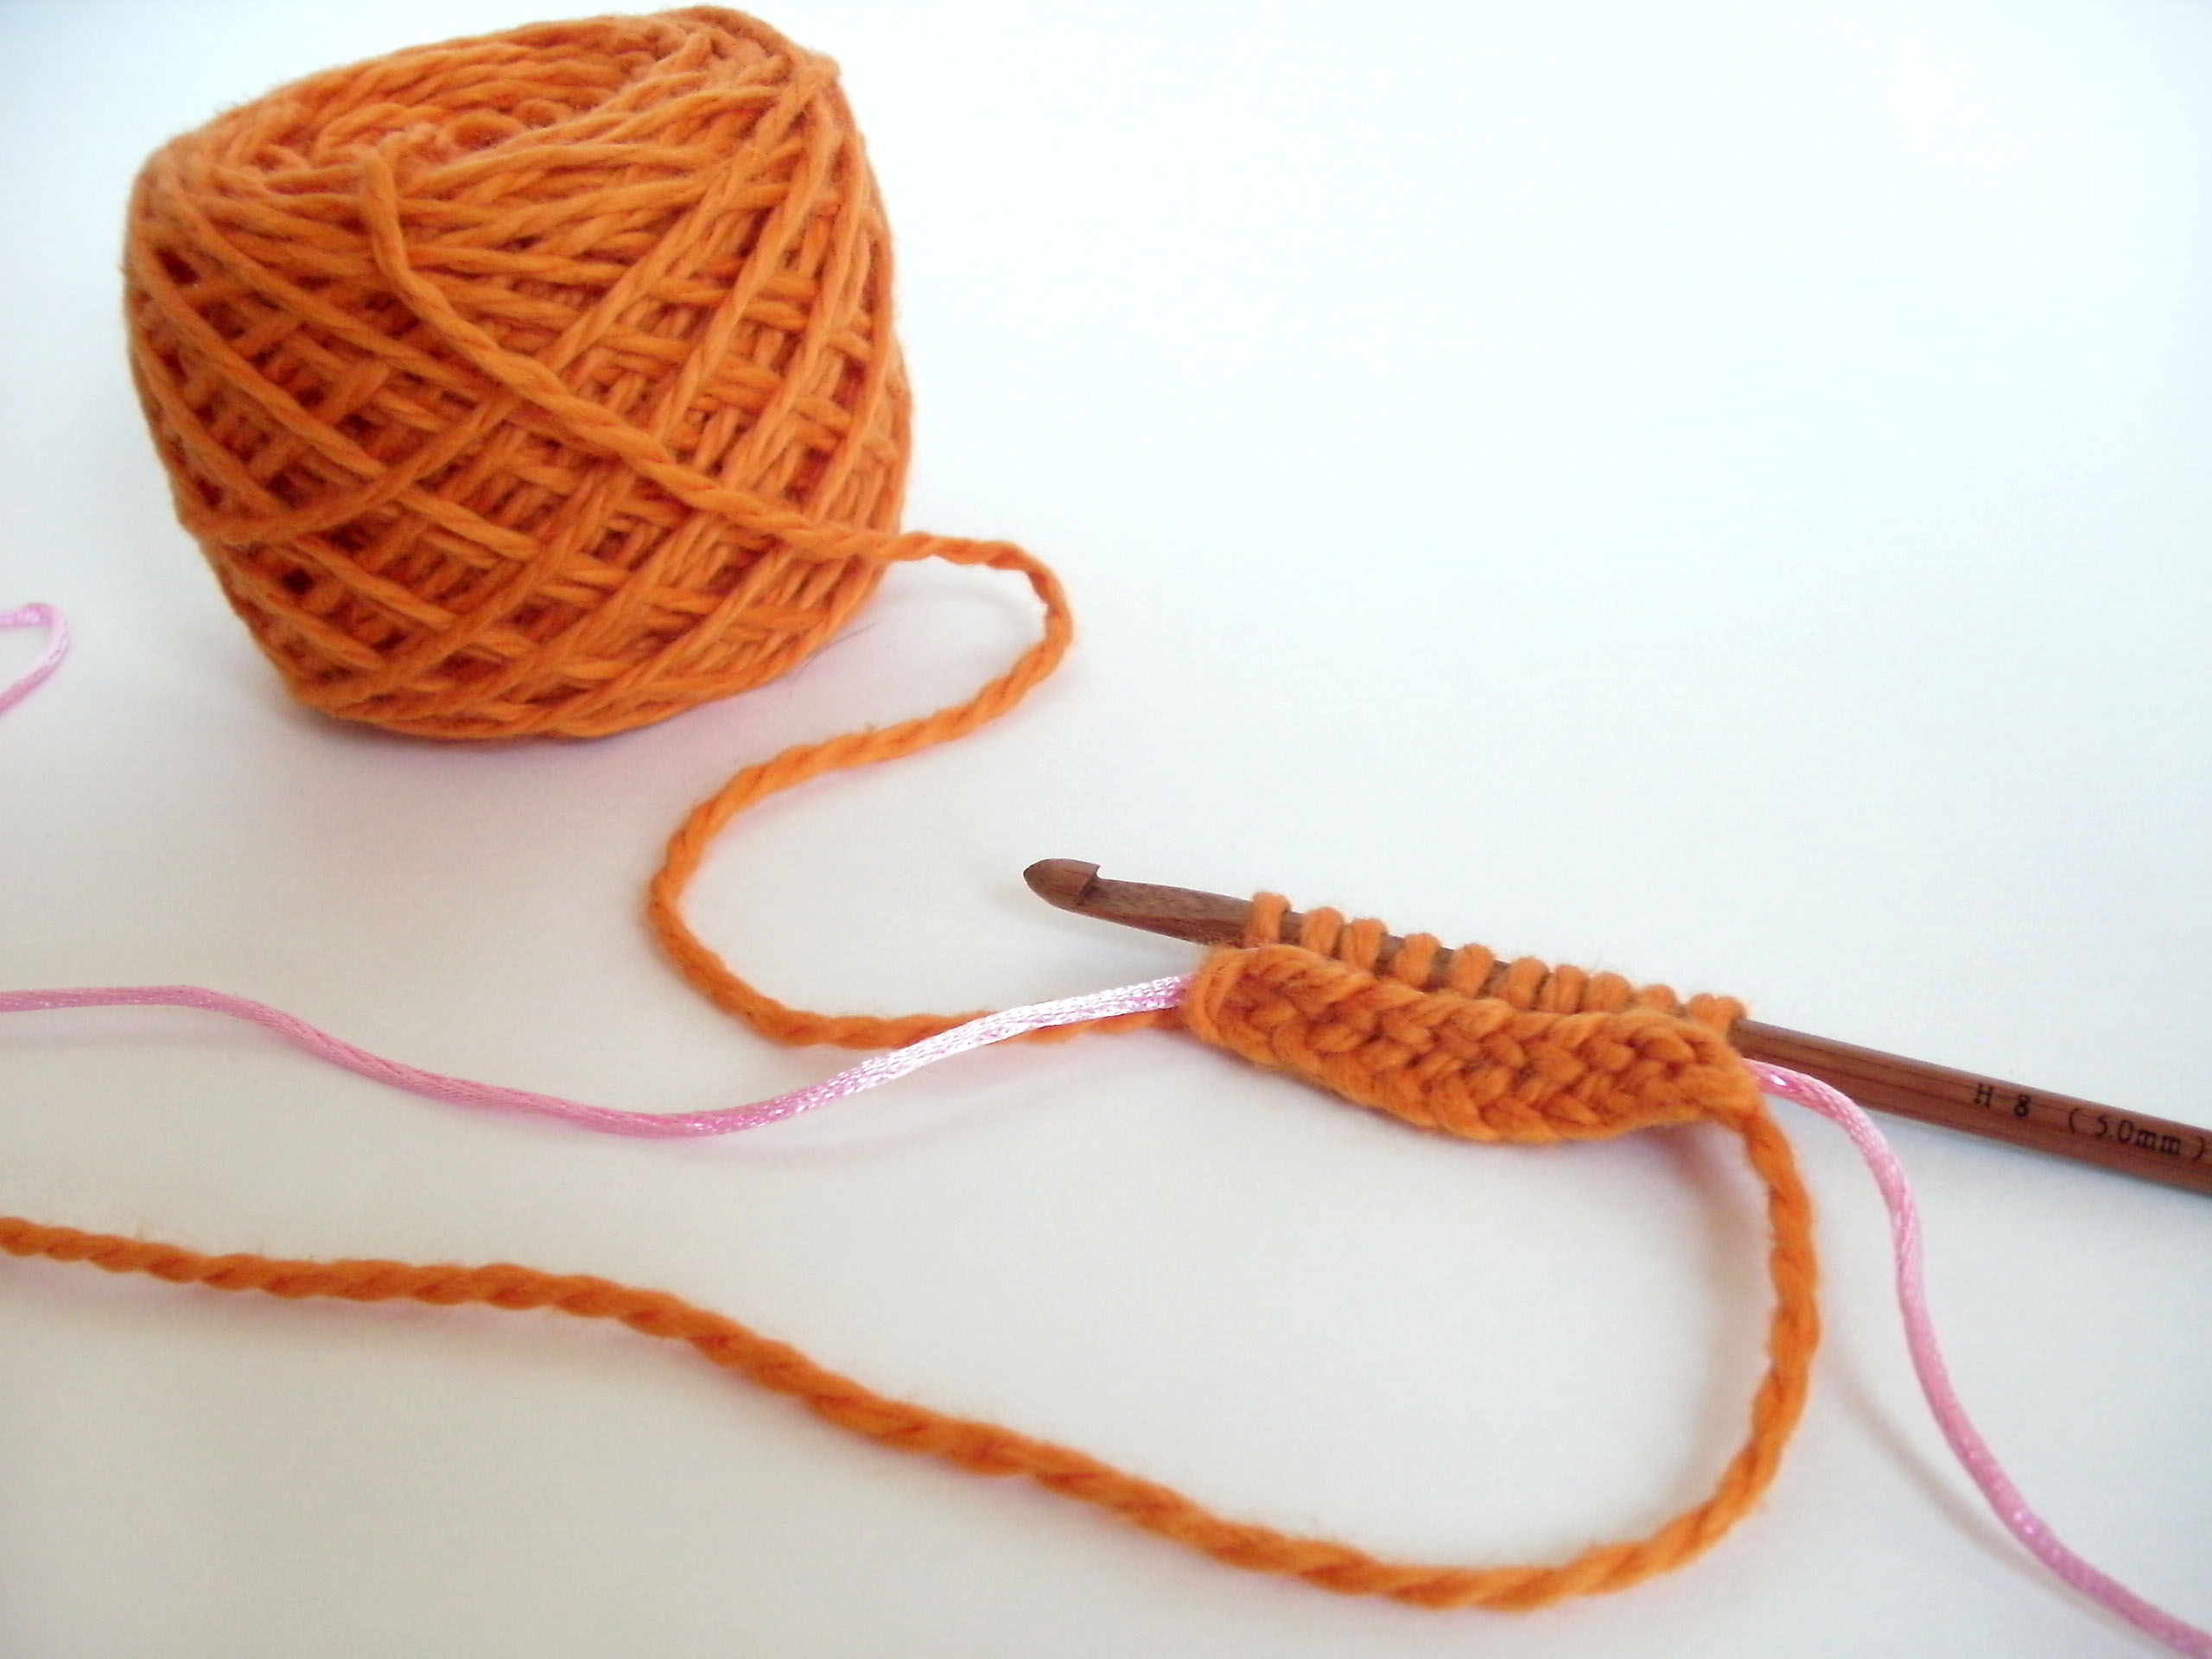 Bulk private Discharge Knook (knitting with a crochet hook): is it worth learning? - Shiny Happy  World